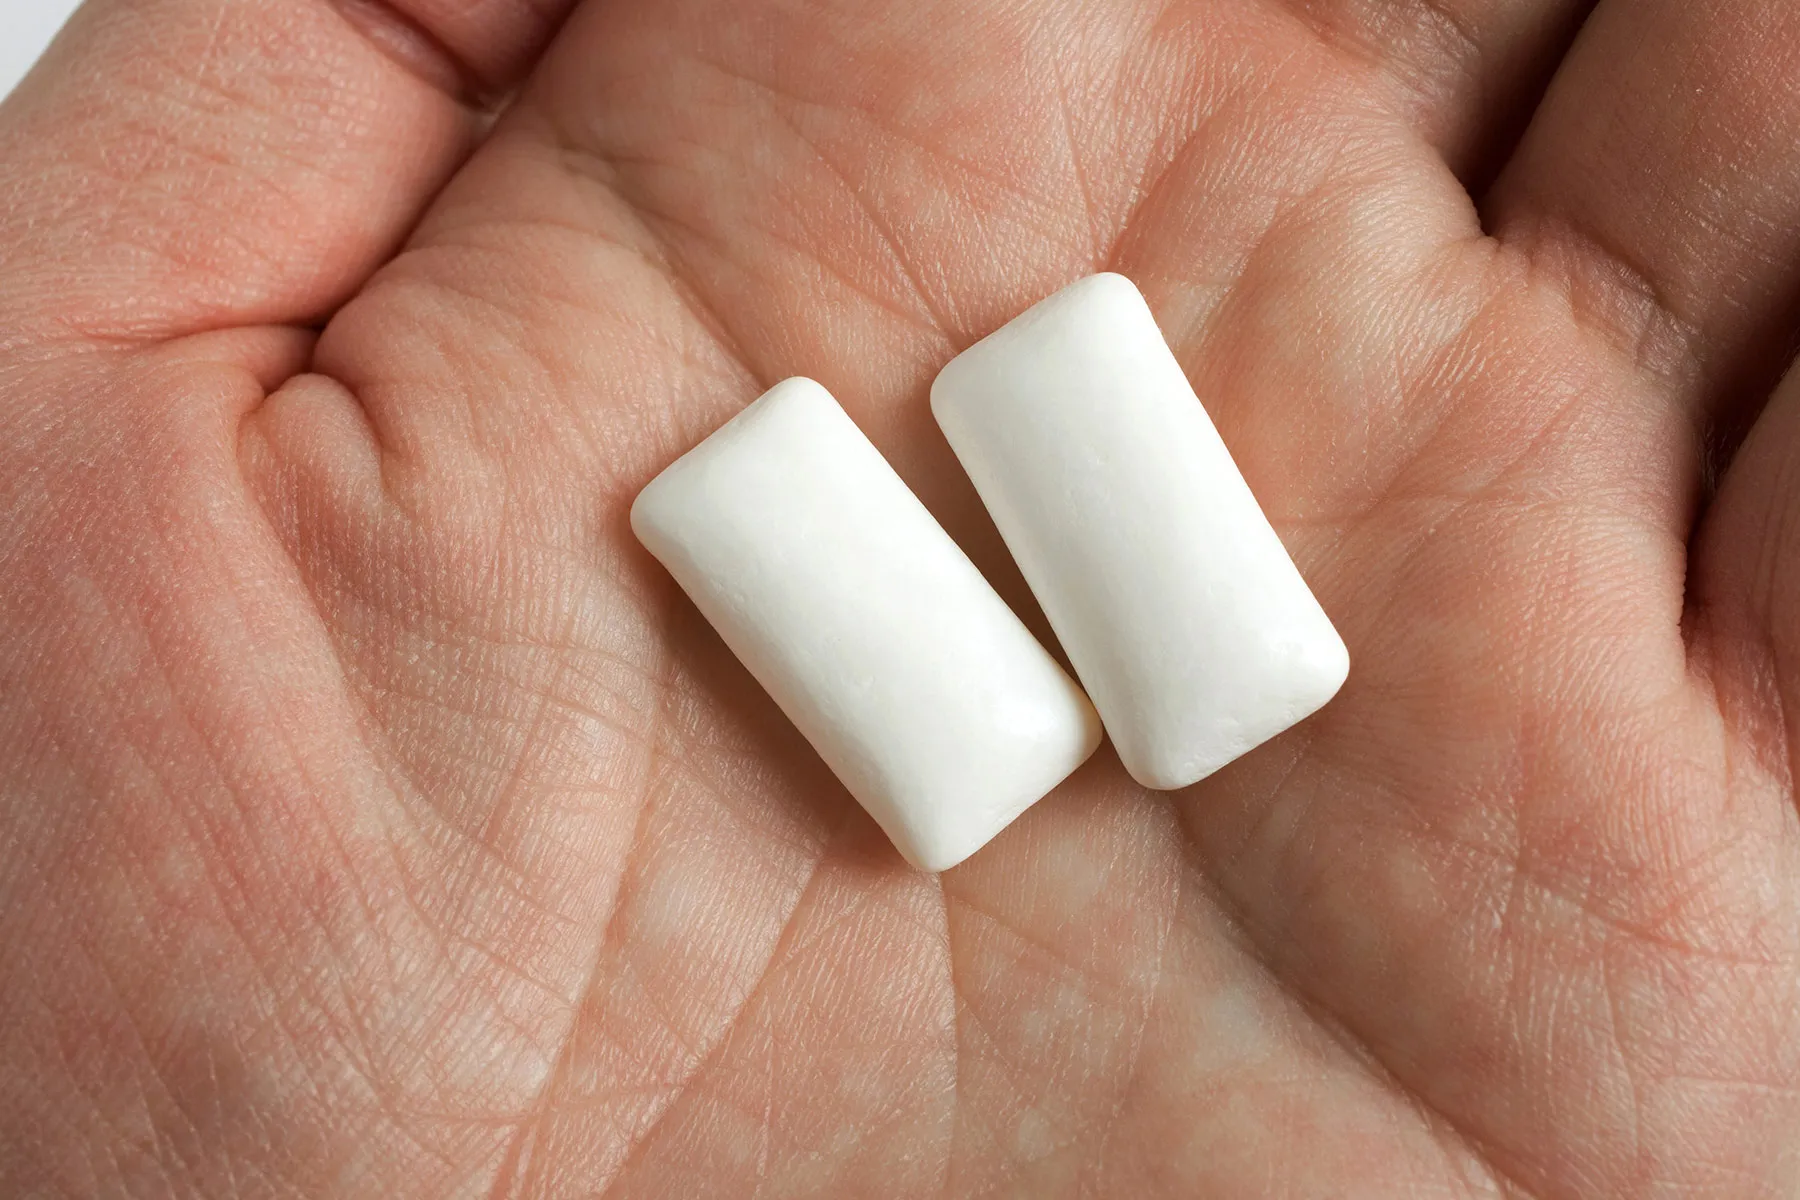 photo of pieces of chewing gum in hand